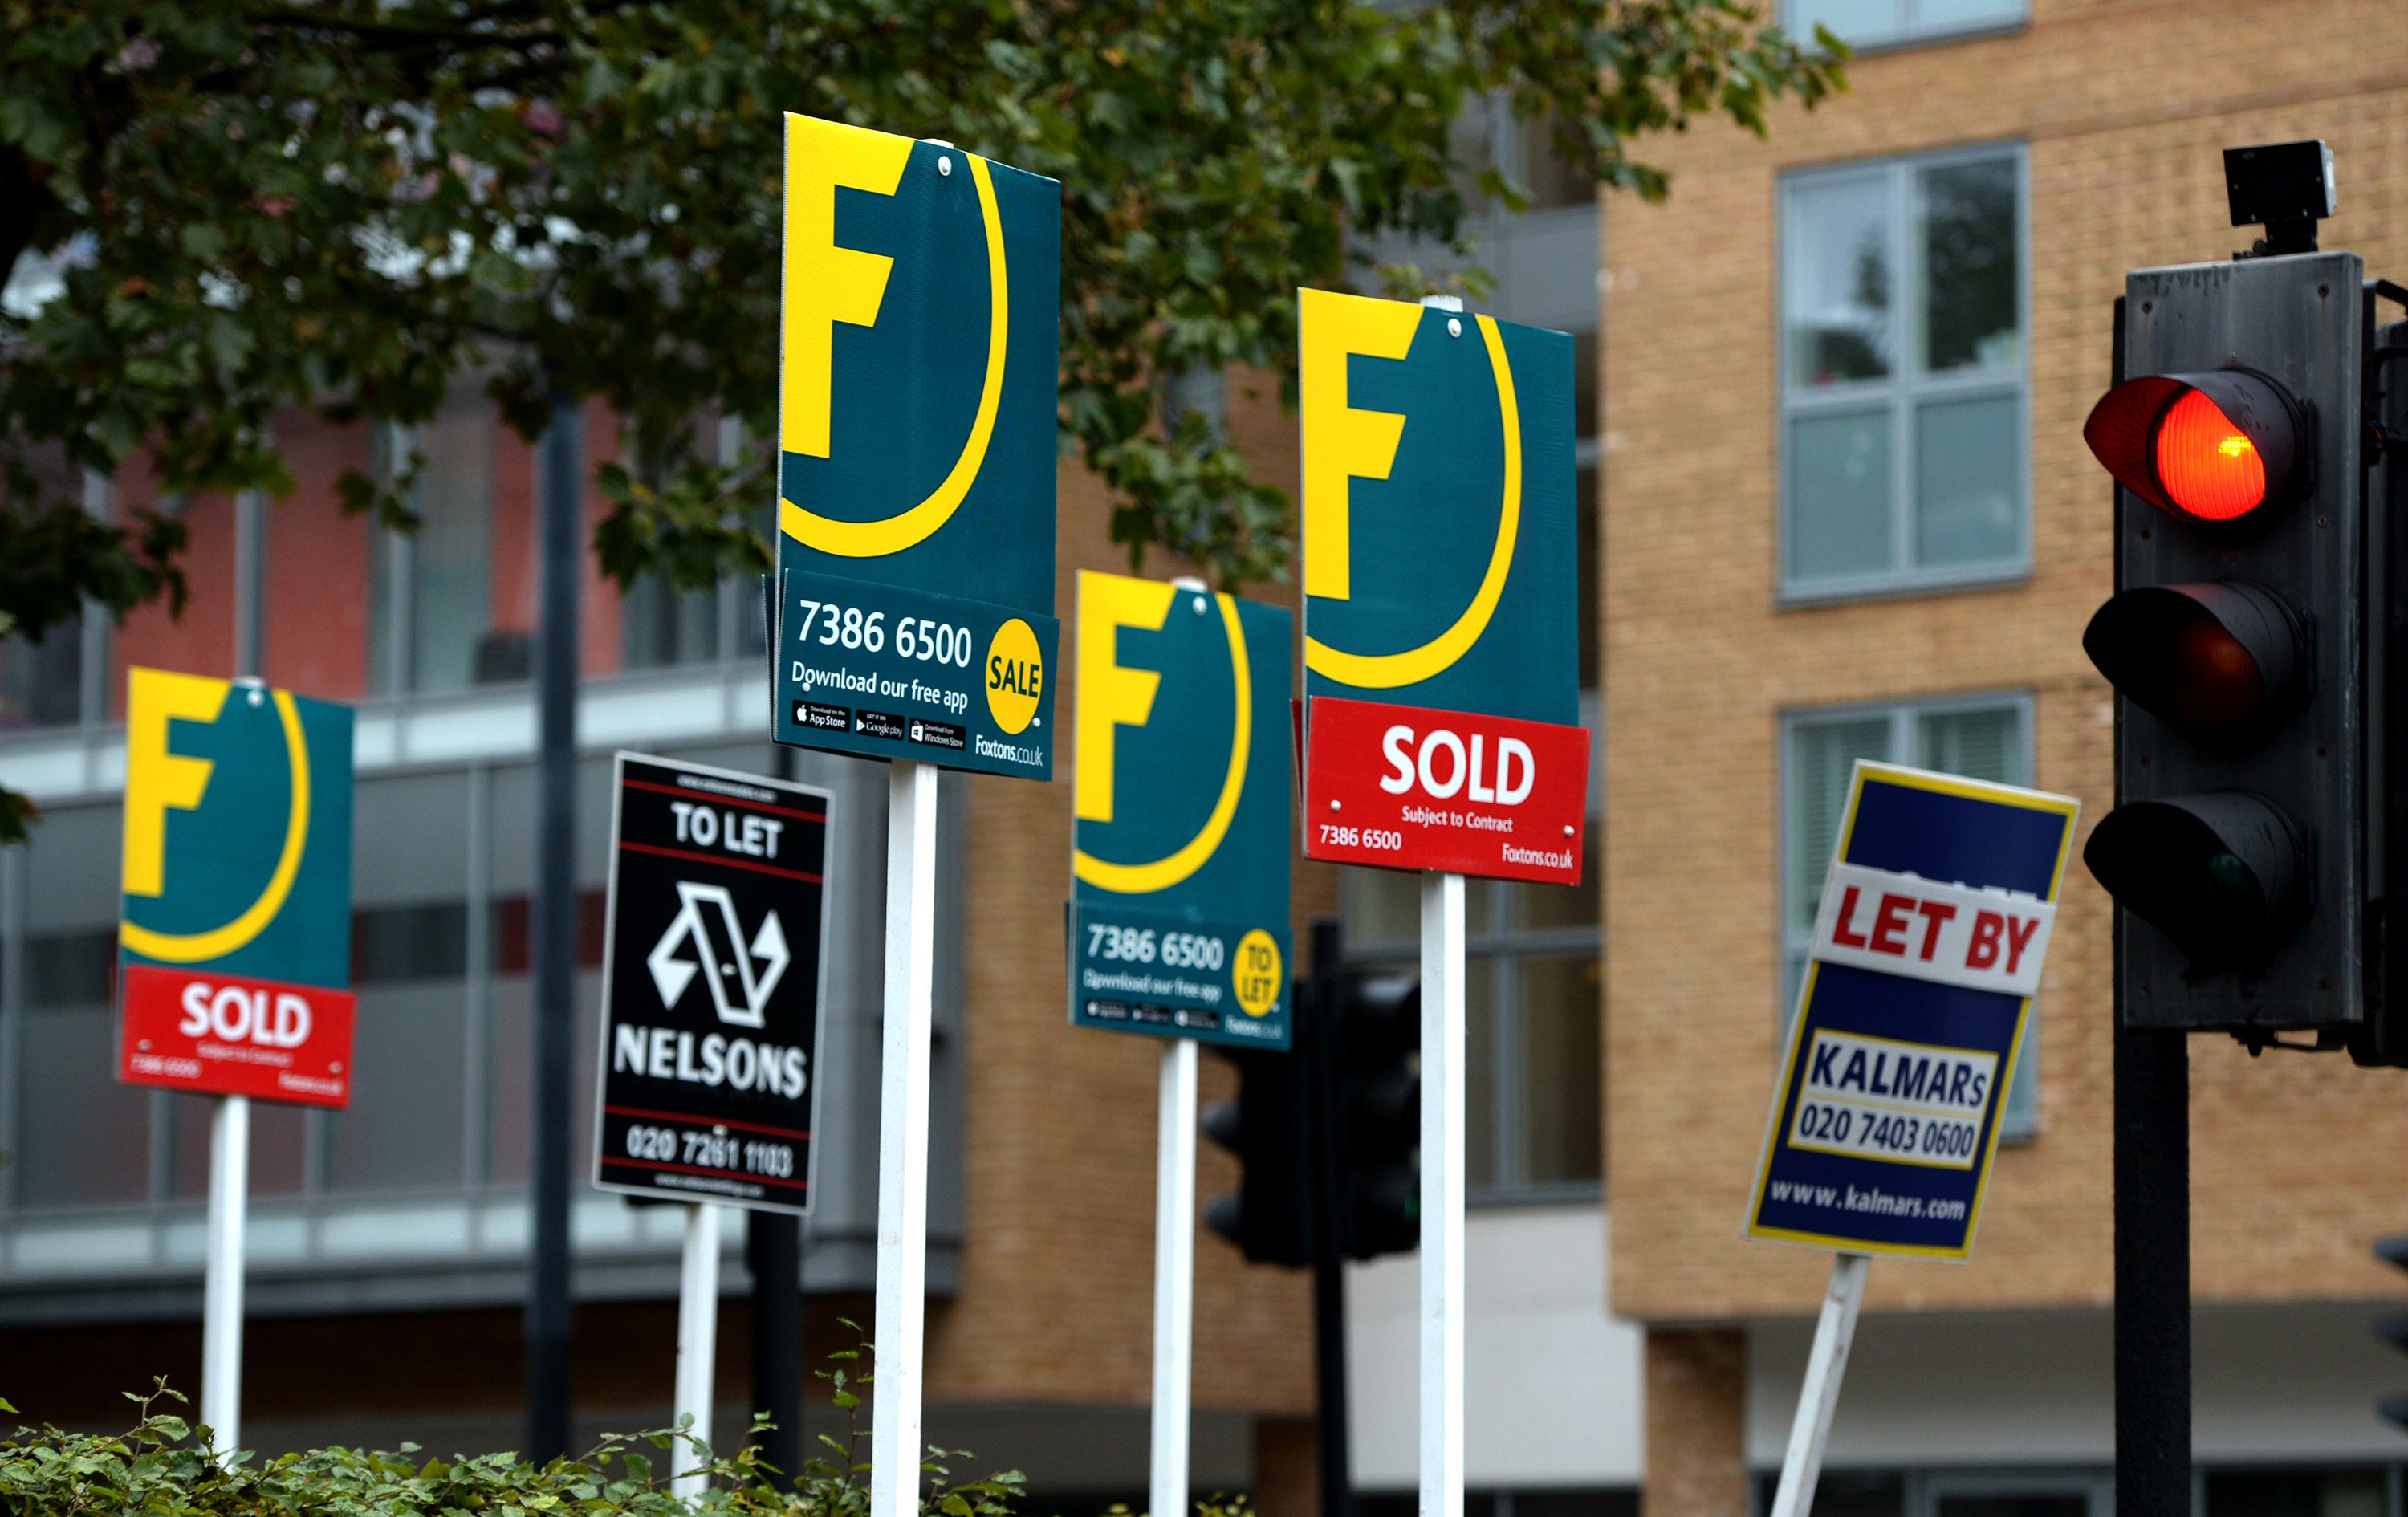 Changes to stamp duty saved buyers of an average home £3,419 while the average sale price of a property has soared £21,956